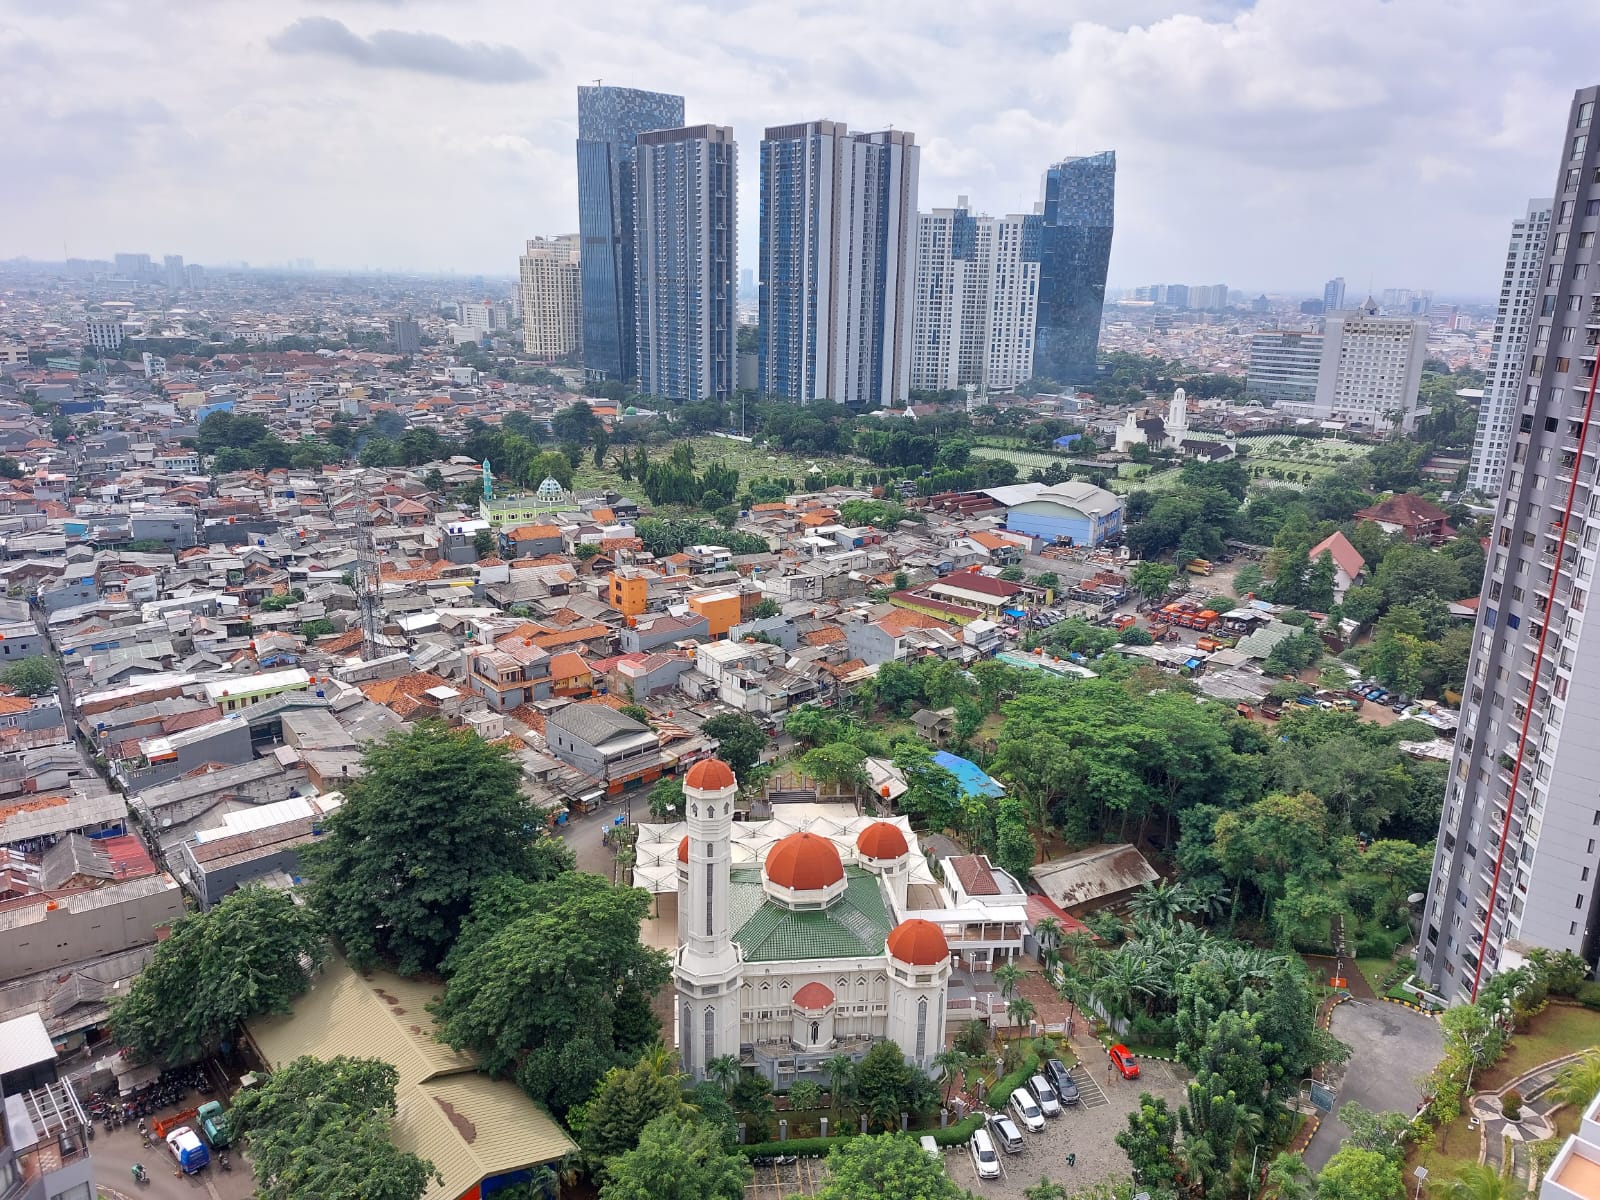 World Bank lowers Indonesia's economic projection to 5.1 pct